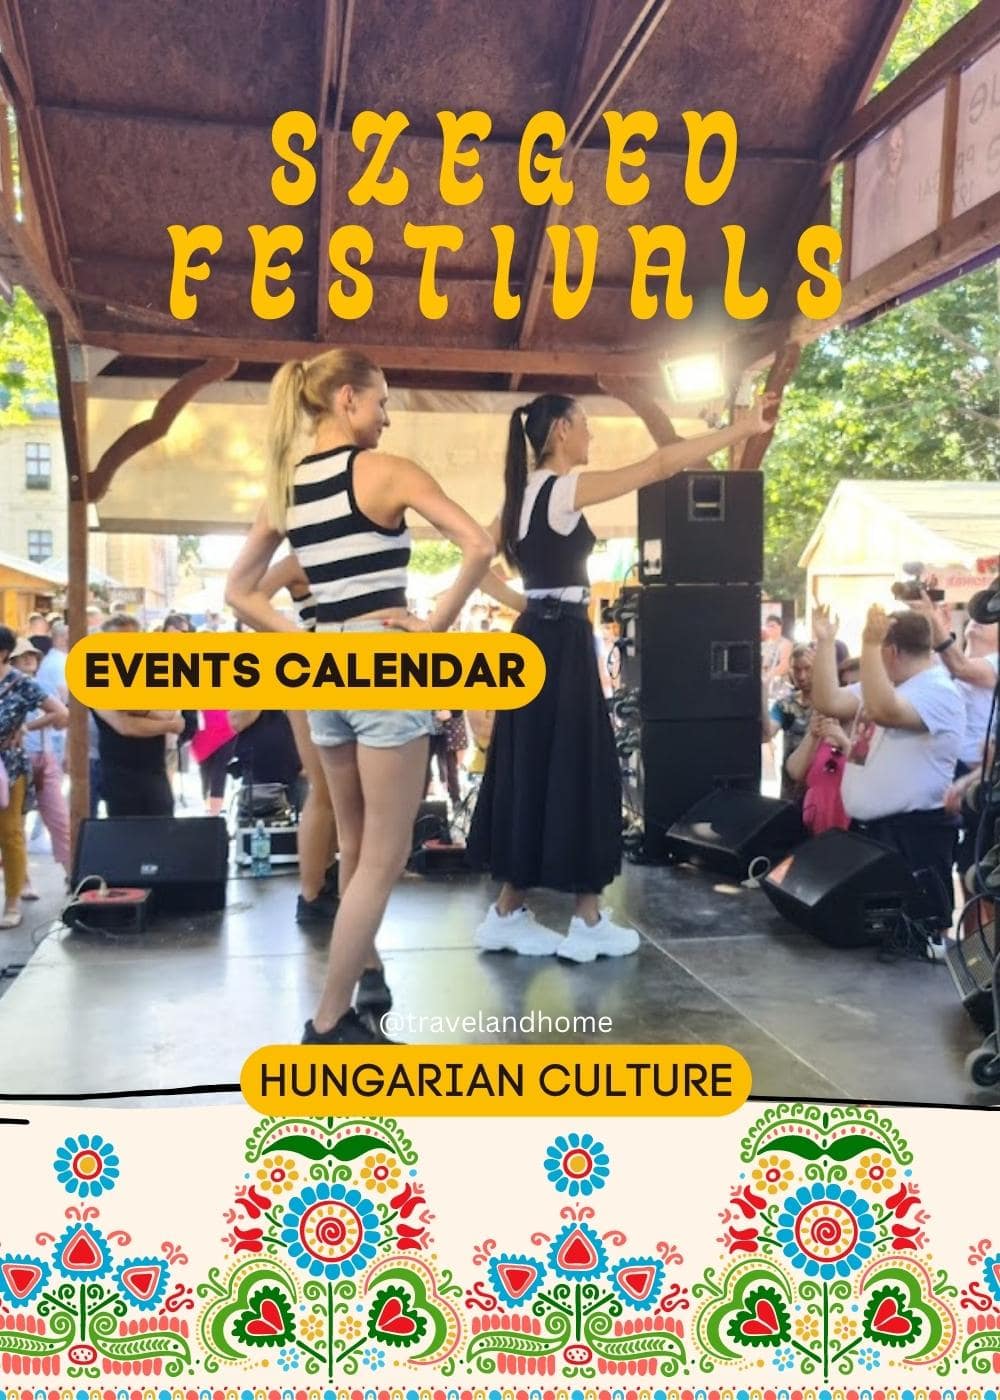 All festivals in Szeged dates where when Hungarian culture things to do in Szeged travelandhome travel and home reis en huis